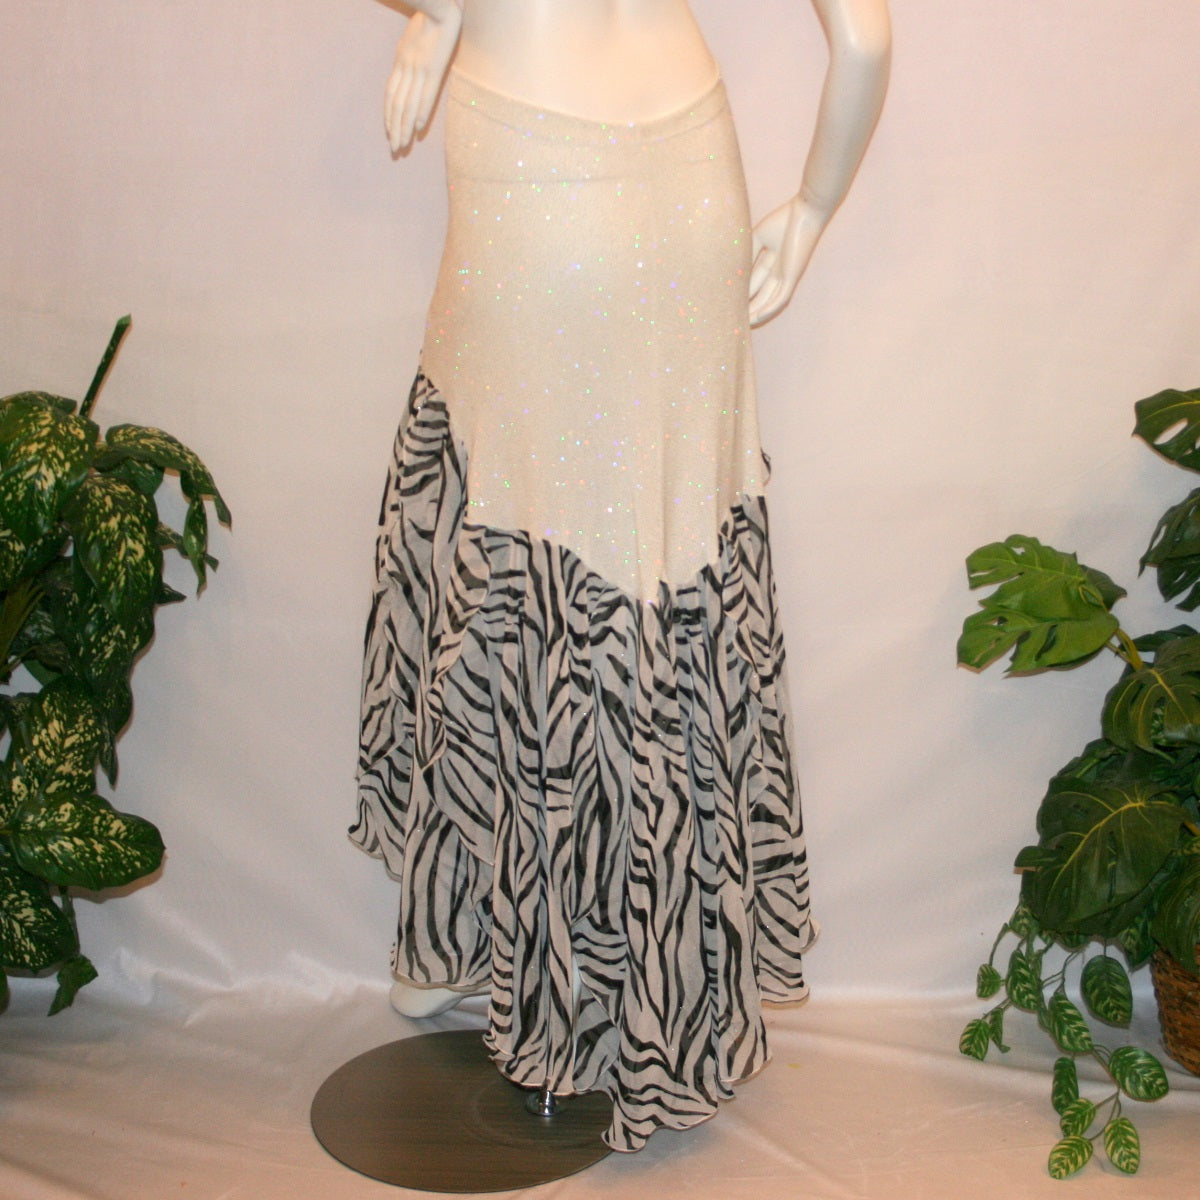 back view of Ballroom style skirt created of white glitter slinky with yards of zebra print flowing panels will work great to create a converta ballroom dress